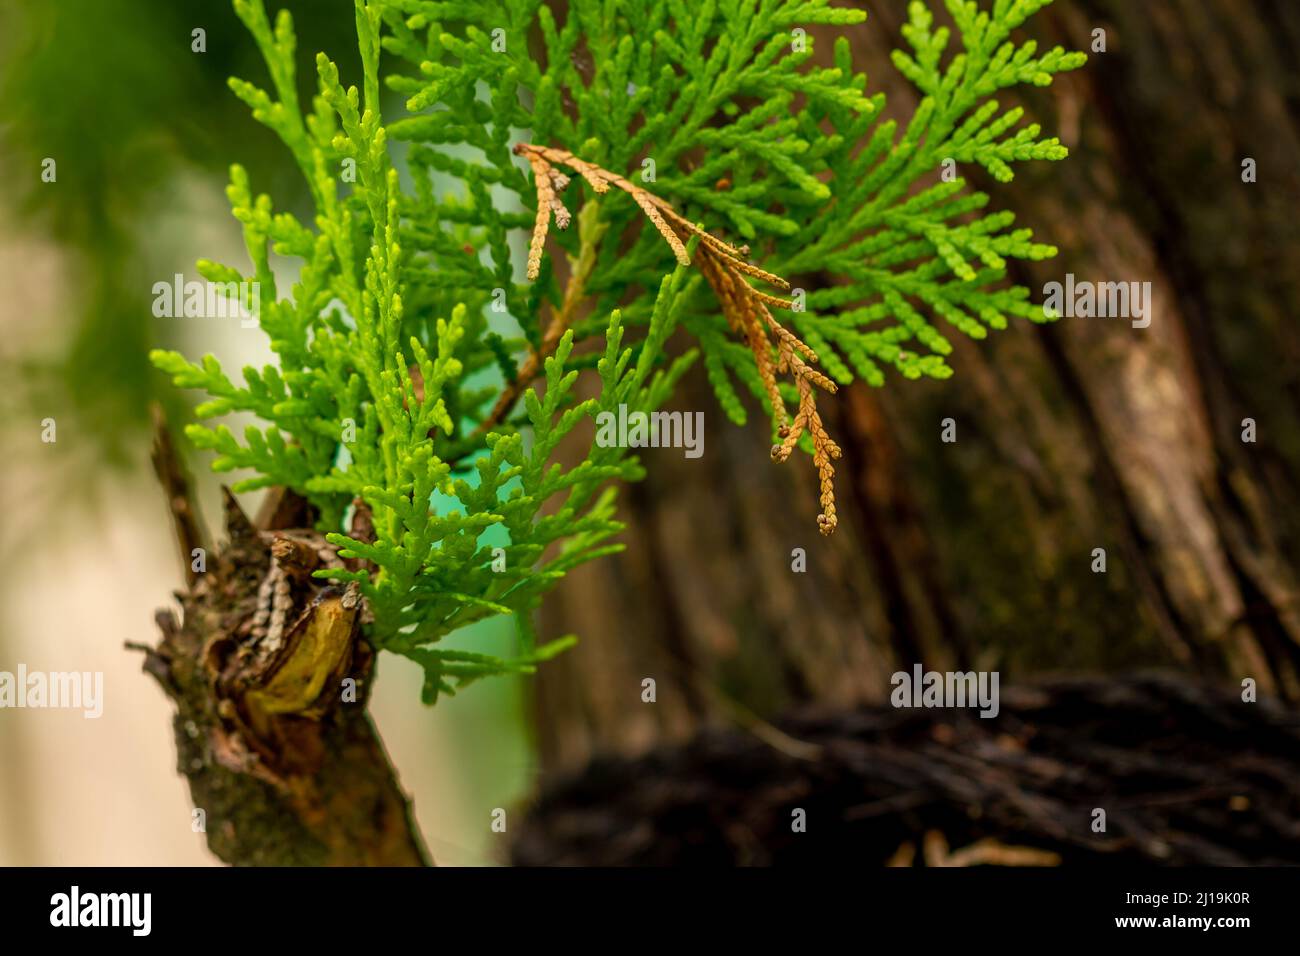 Fir plant shoots grow beside the main stem which is already large, used as a shade plant in gardens or office areas Stock Photo